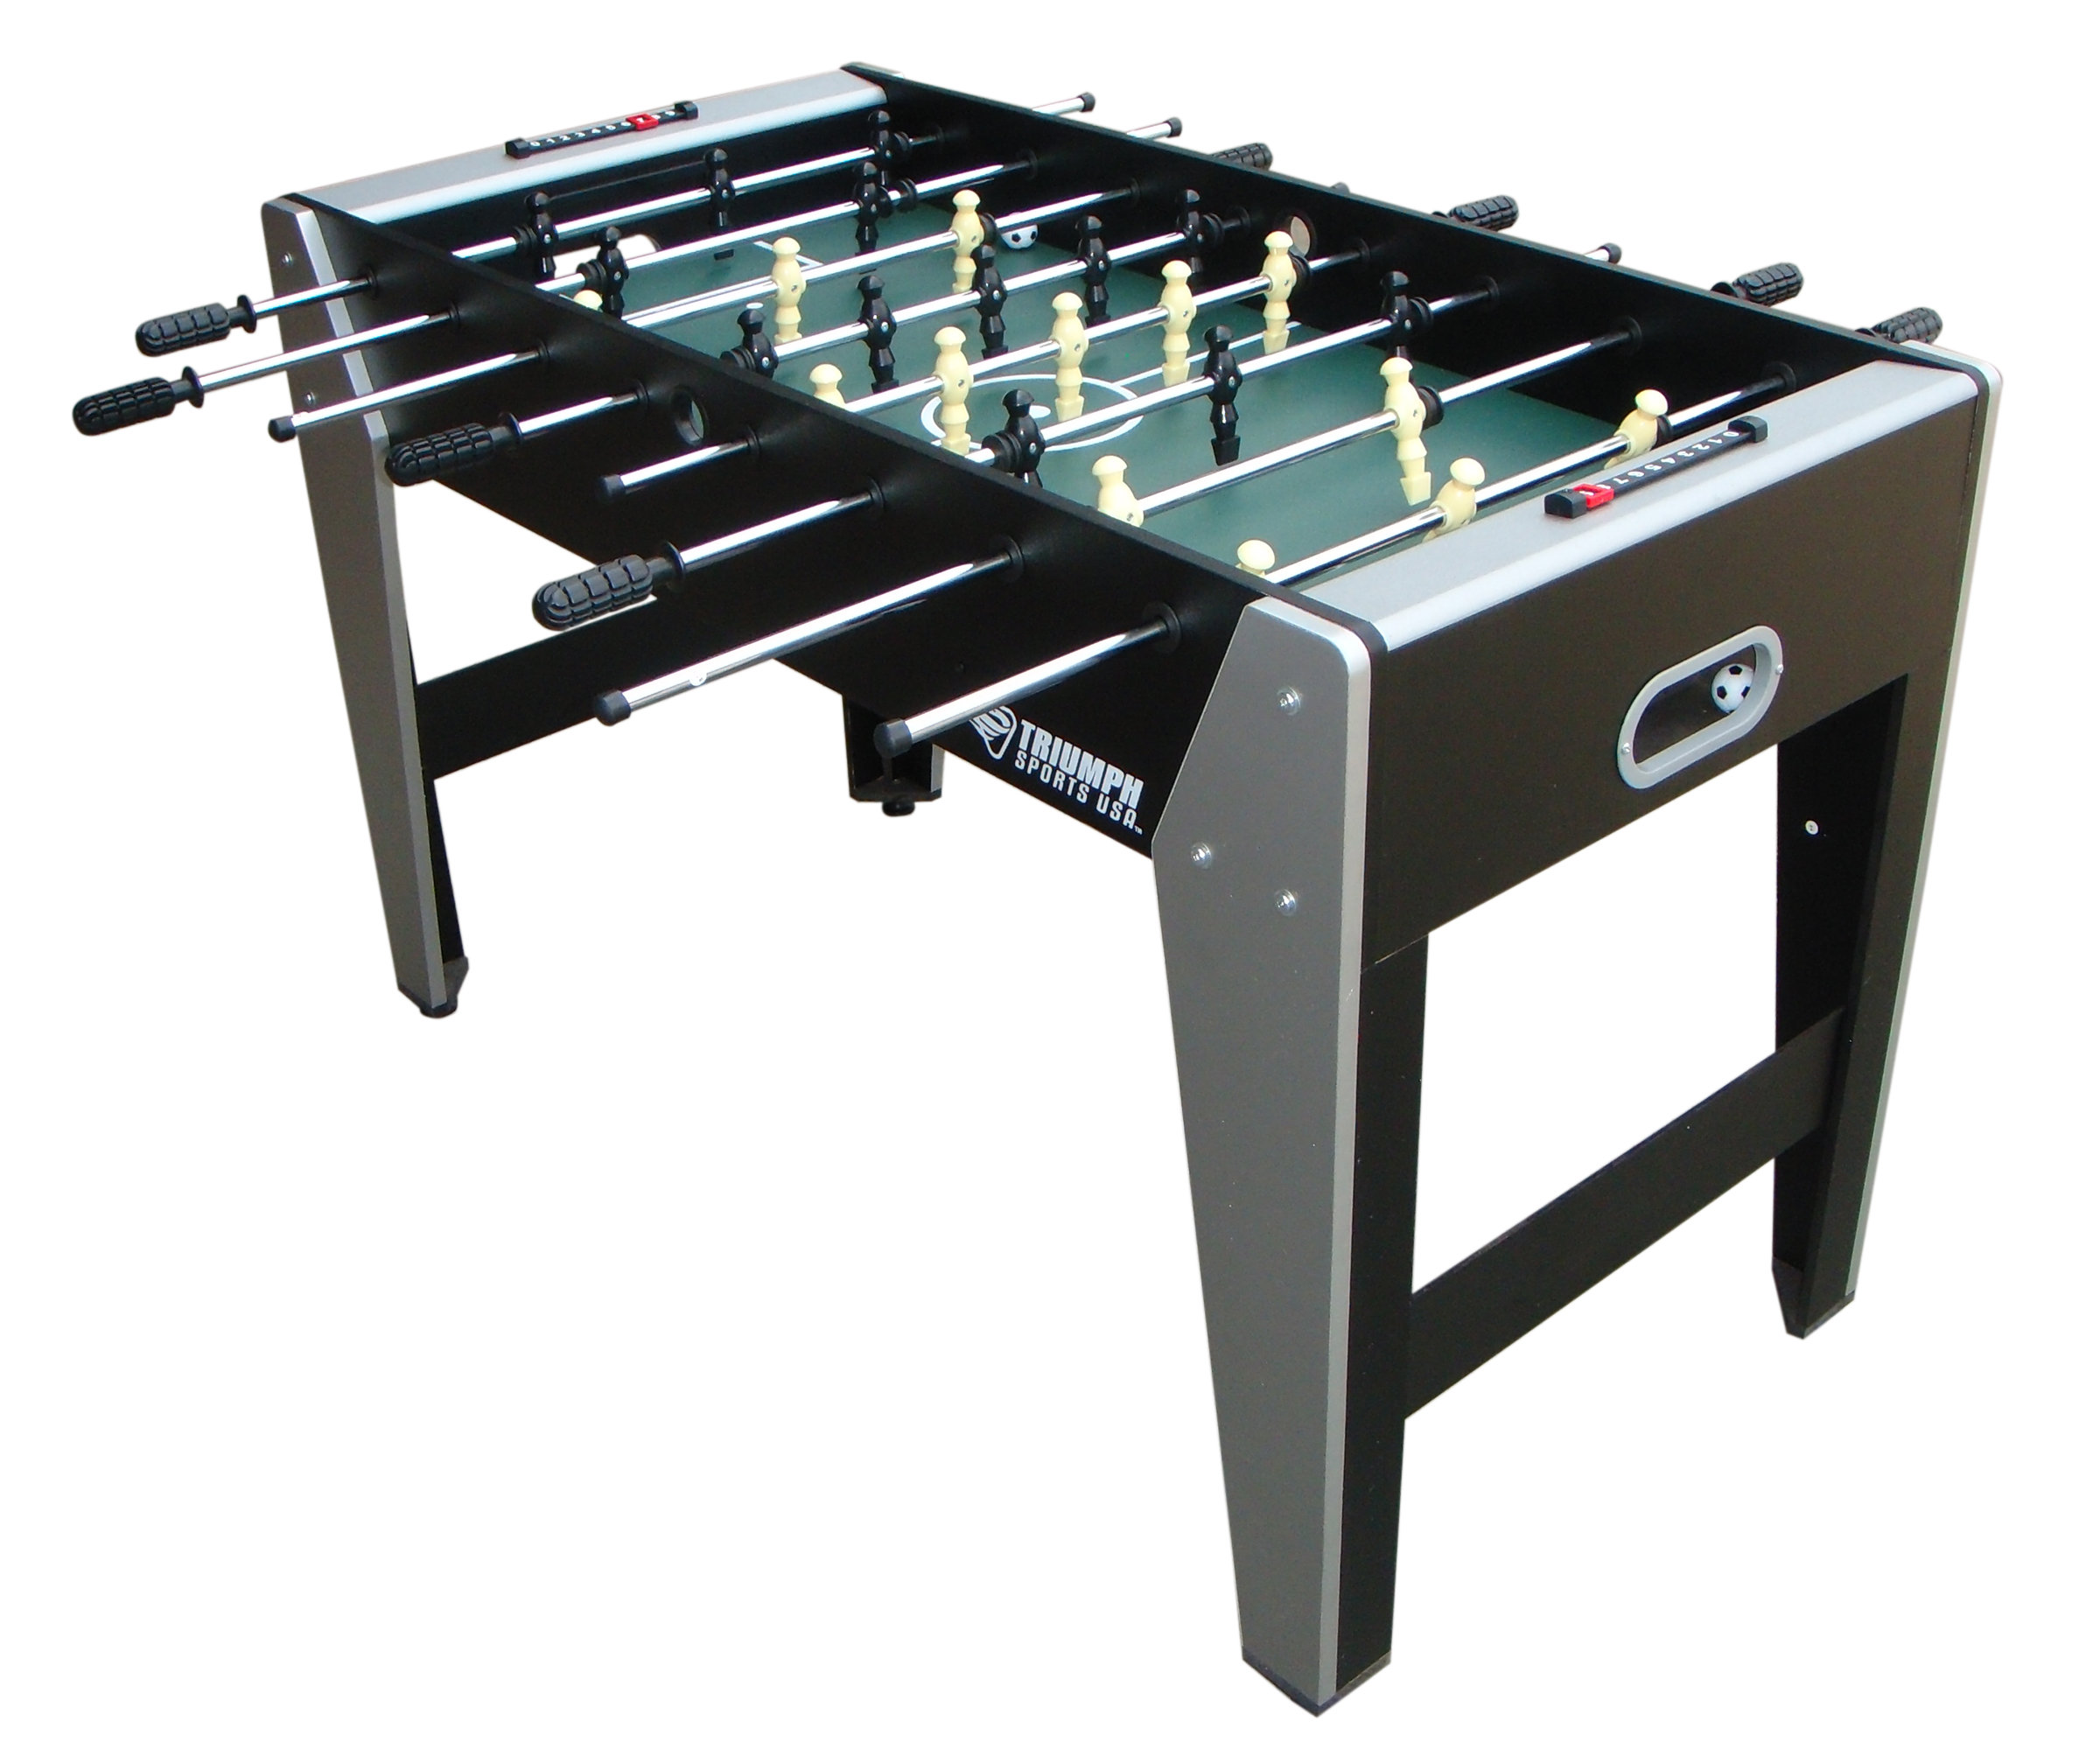 Triumph 48 Inch Arcade Sports Sweeper Regulation Size Foosball Soccer Table Game for sale online 